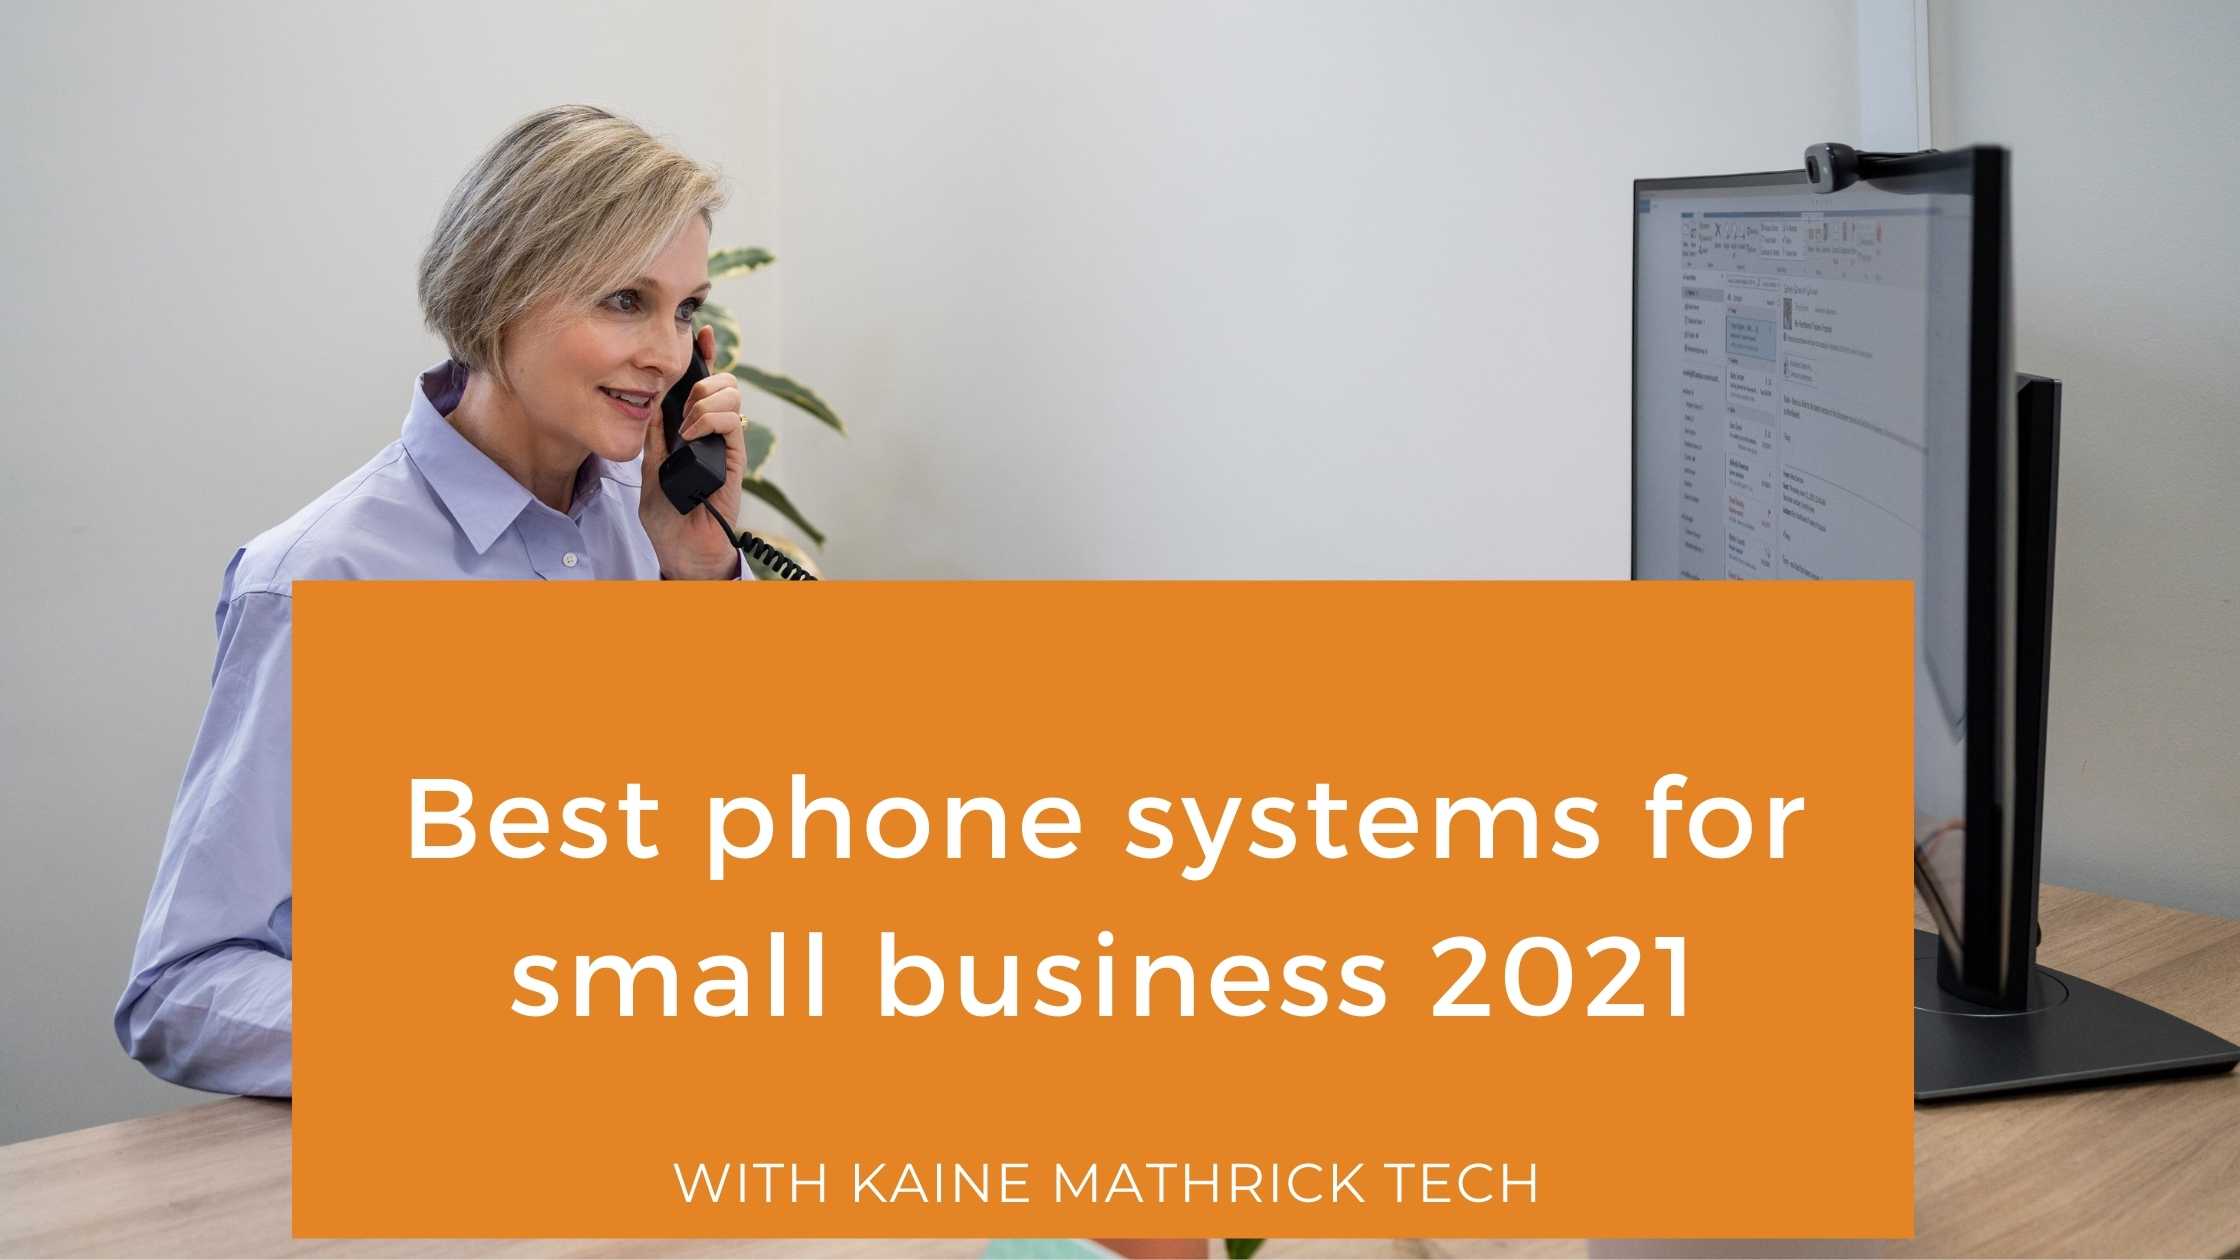 Best phone systems for small business 2021